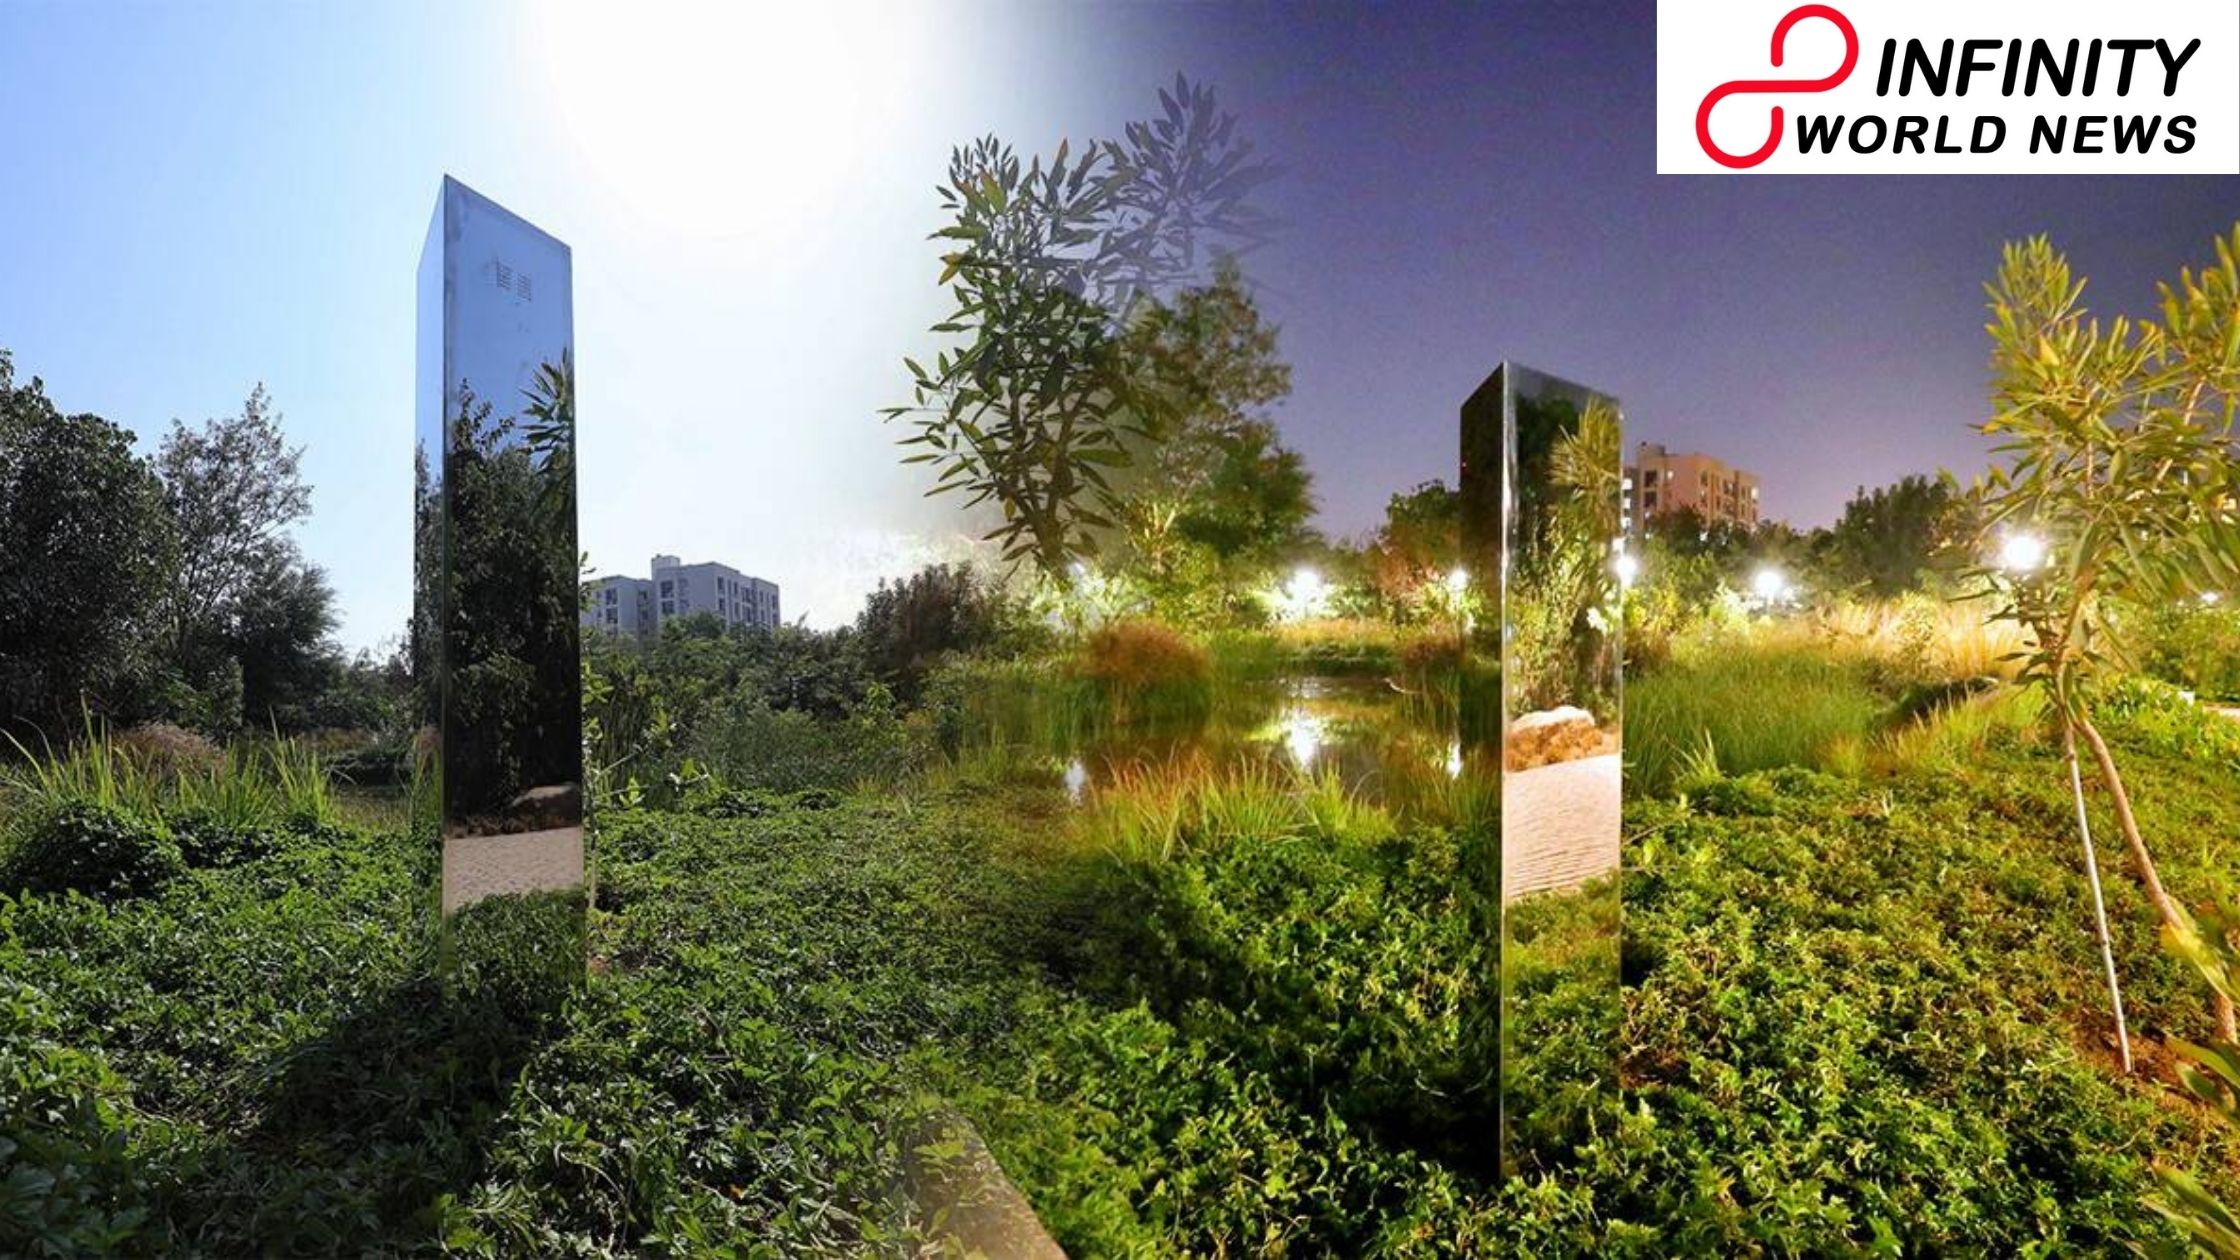 Strange Monolith Suddenly Disappears from Ahmedabad Park Leaving Behind a Small Note